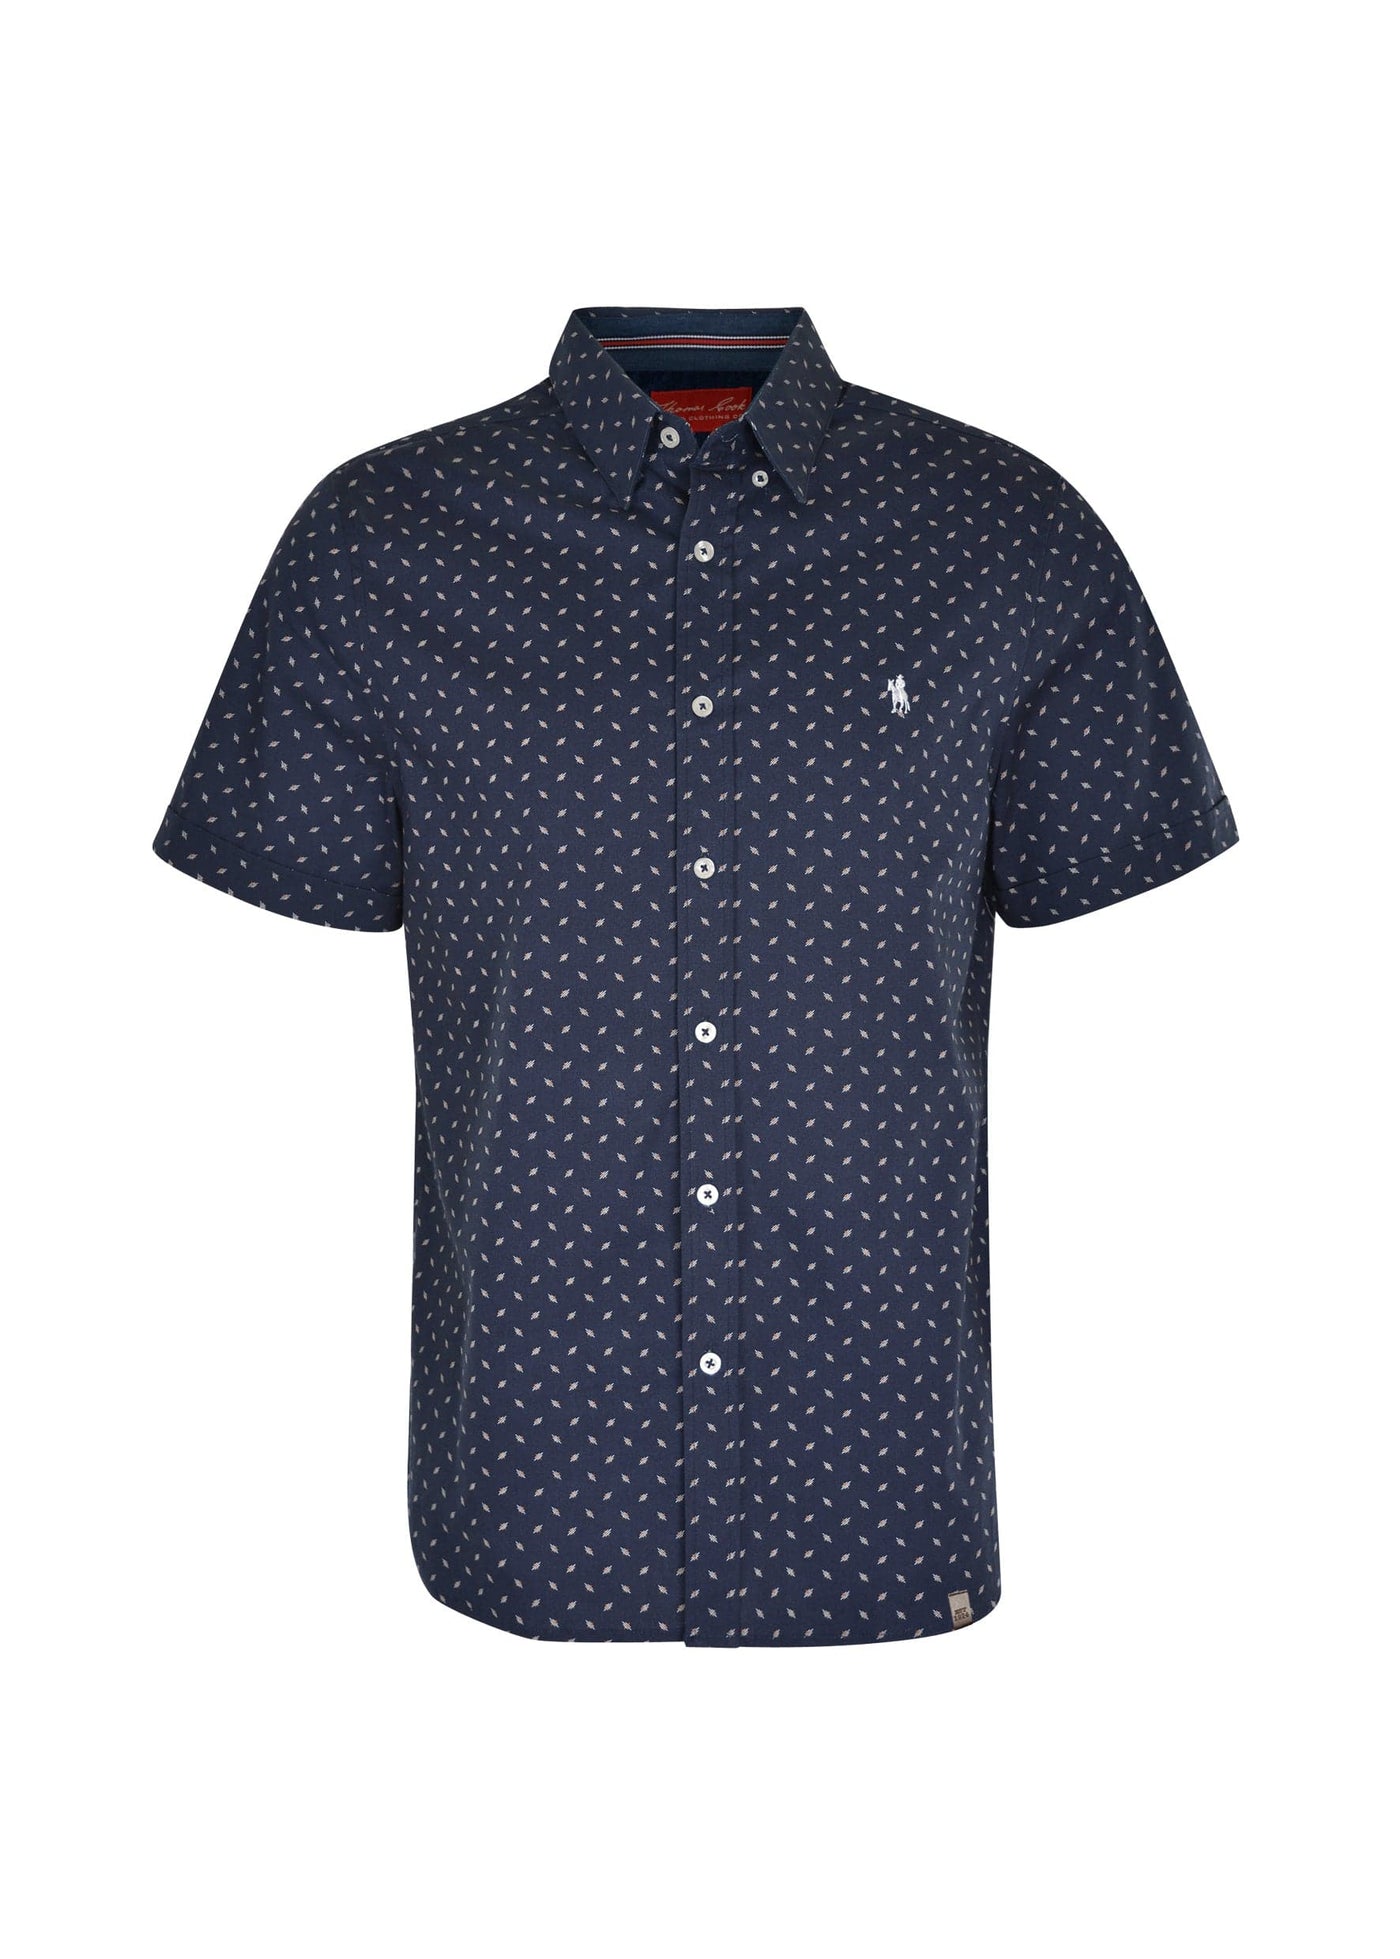 THOMAS COOK BOOTS AND CLOTHING SHIRT T0S1121002 Allumba Tailored Short Sleeve | Navy